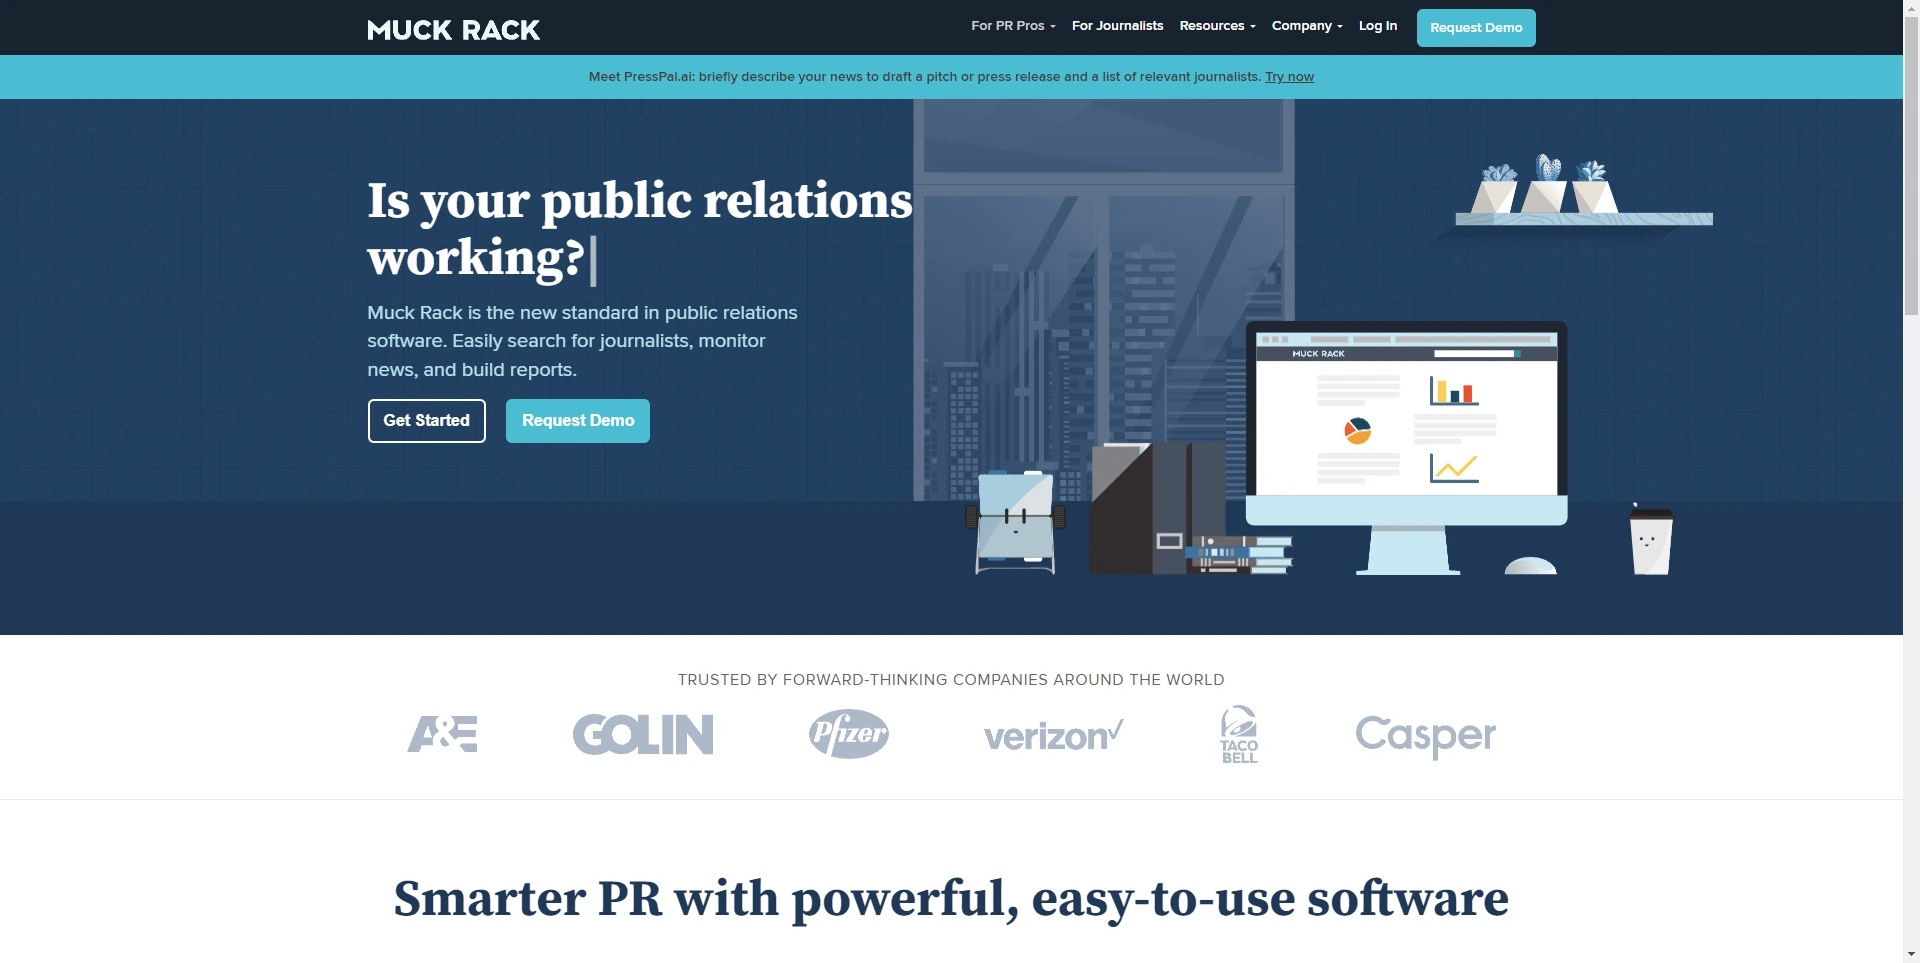 Muck Rack landing page advertising their services and their companies they are trusted by